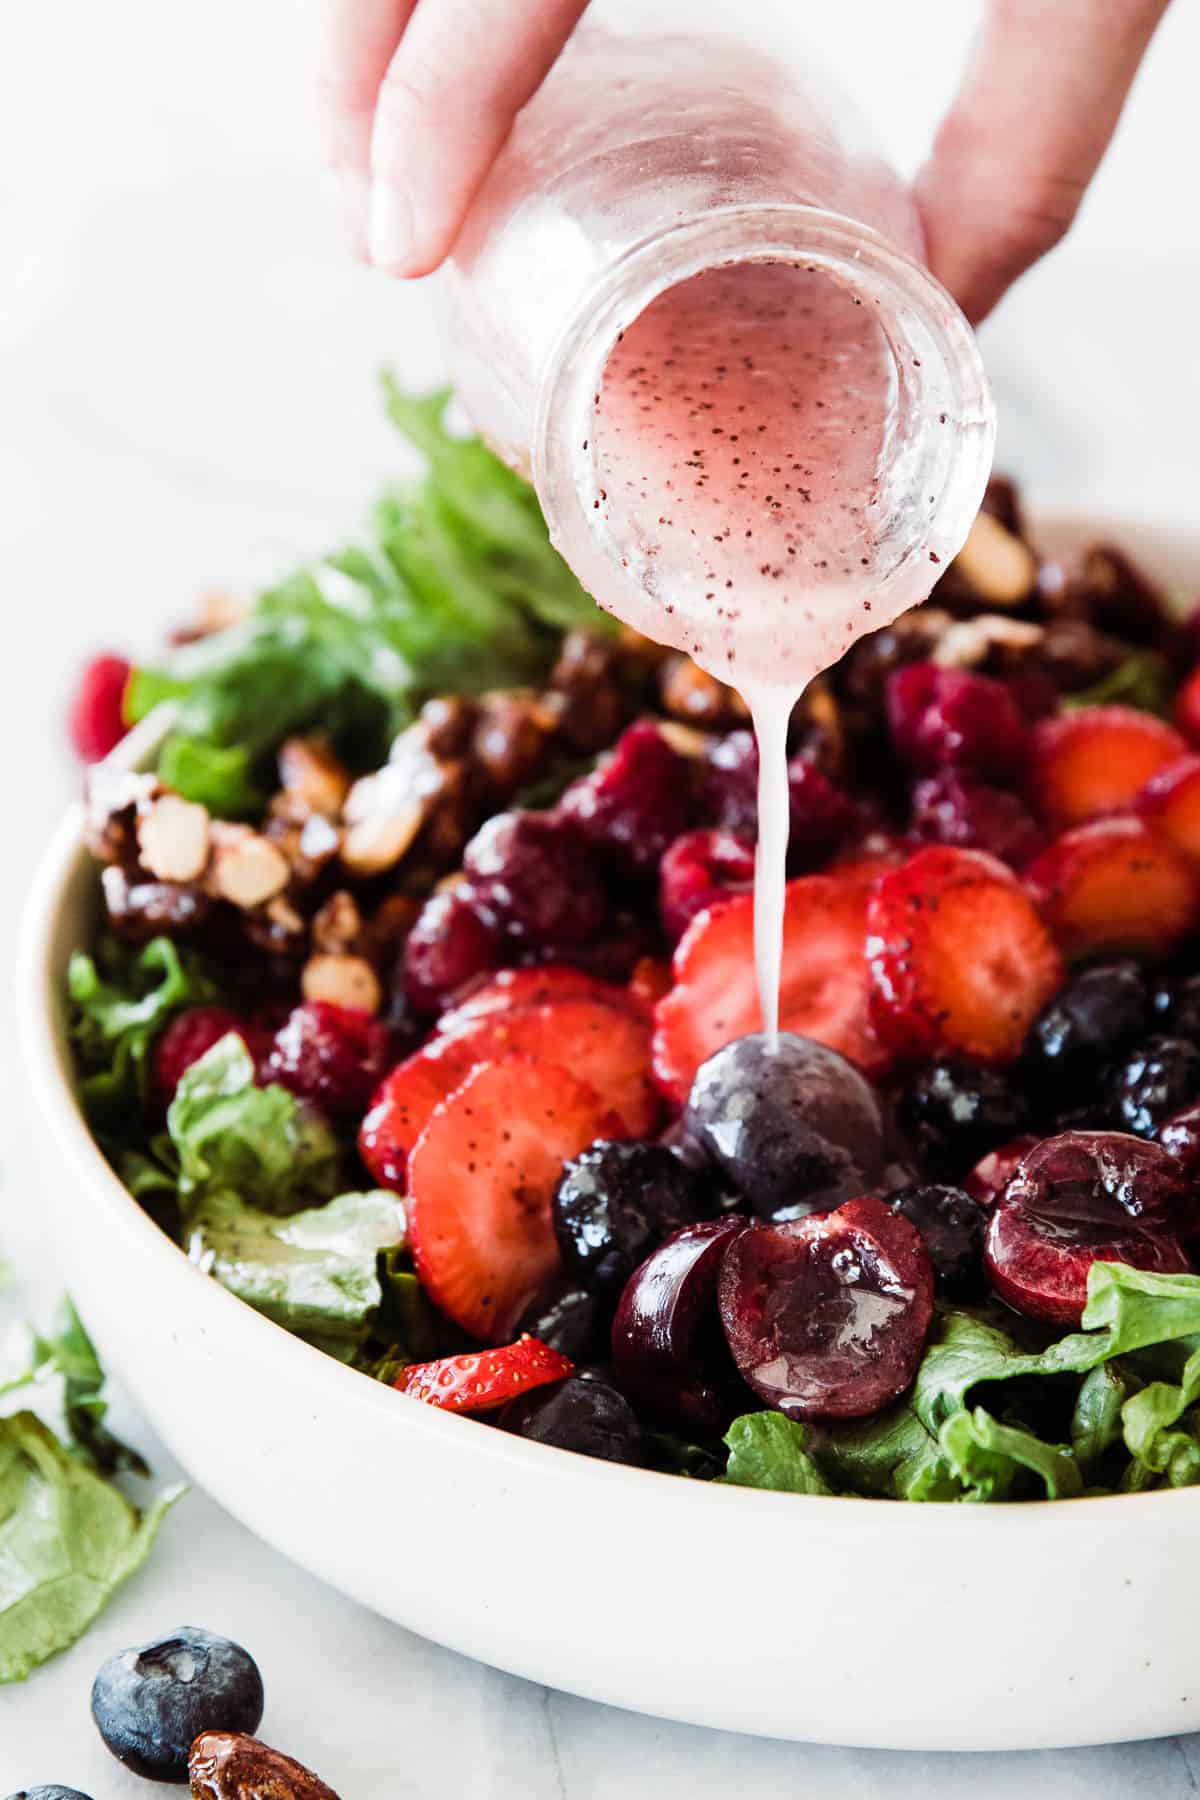 Pink Poppyseed dressing drizzling over berry salad.